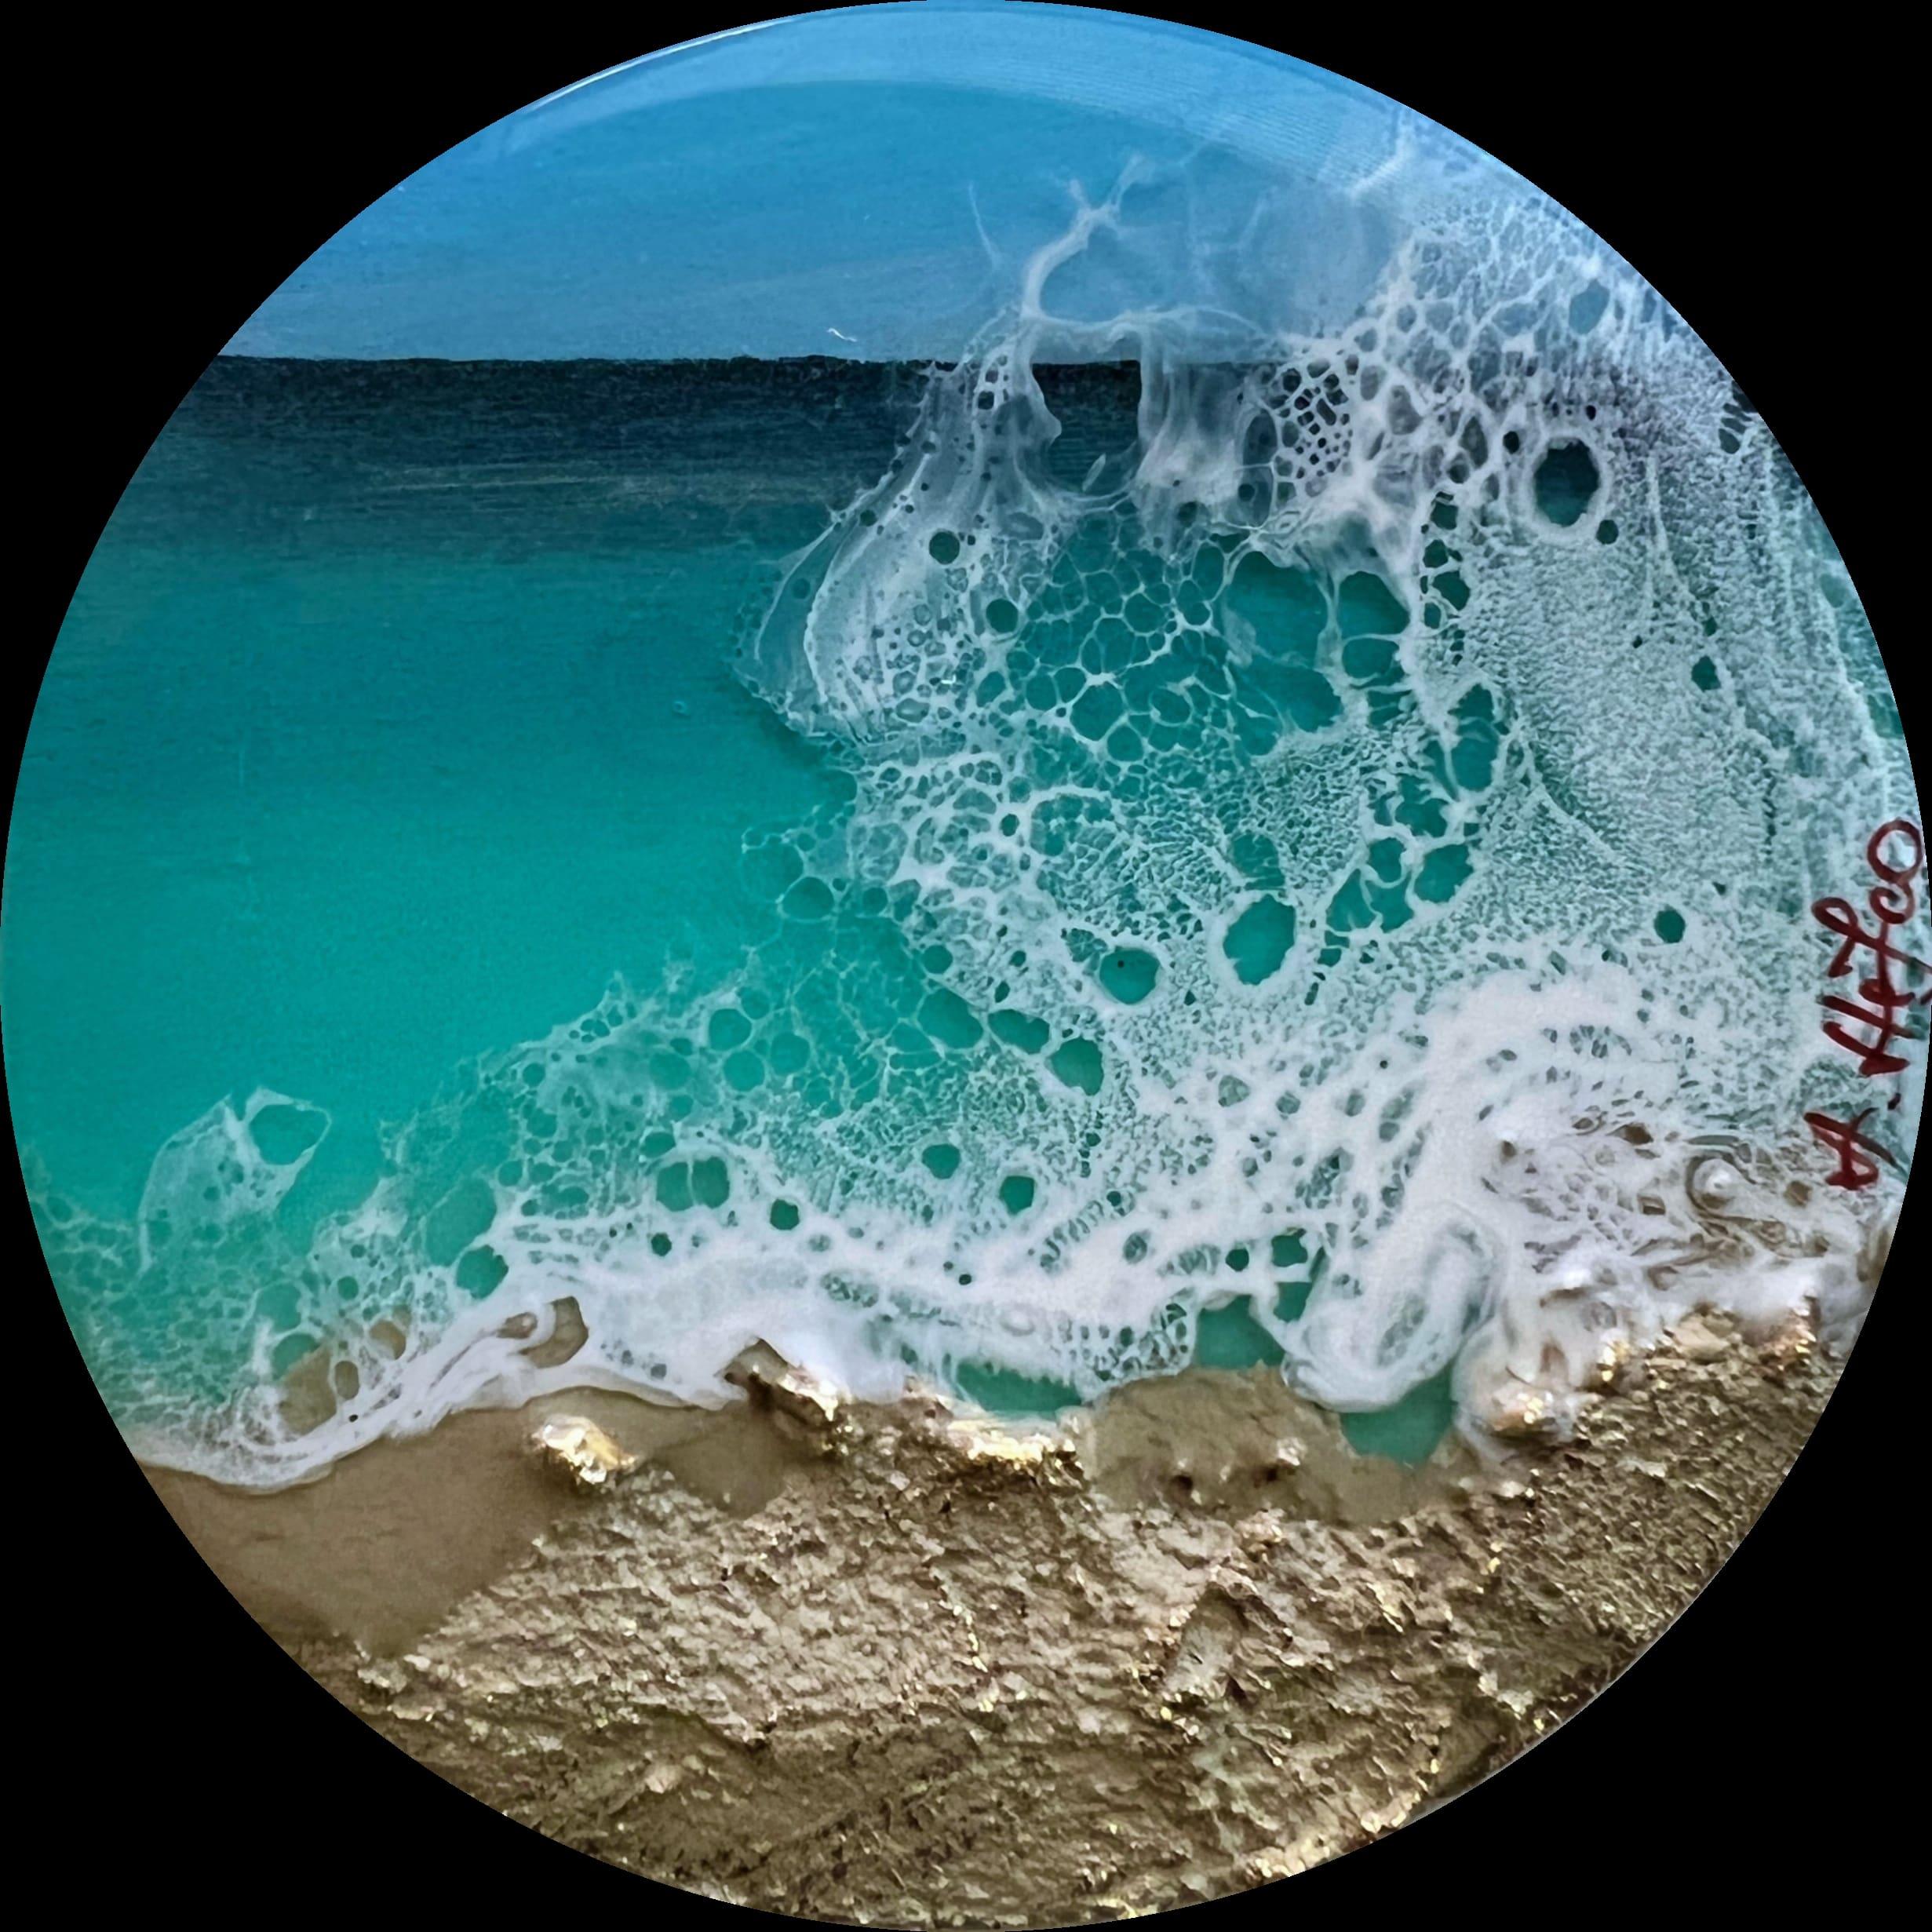 Miniature round ocean painting     Inspired by The Turks And Caicos ocean colors  Different shades of blue tones, turquoise, teal, aqua, beige and white  This painting does not need to be framed, the painted image extends over the sides, it is